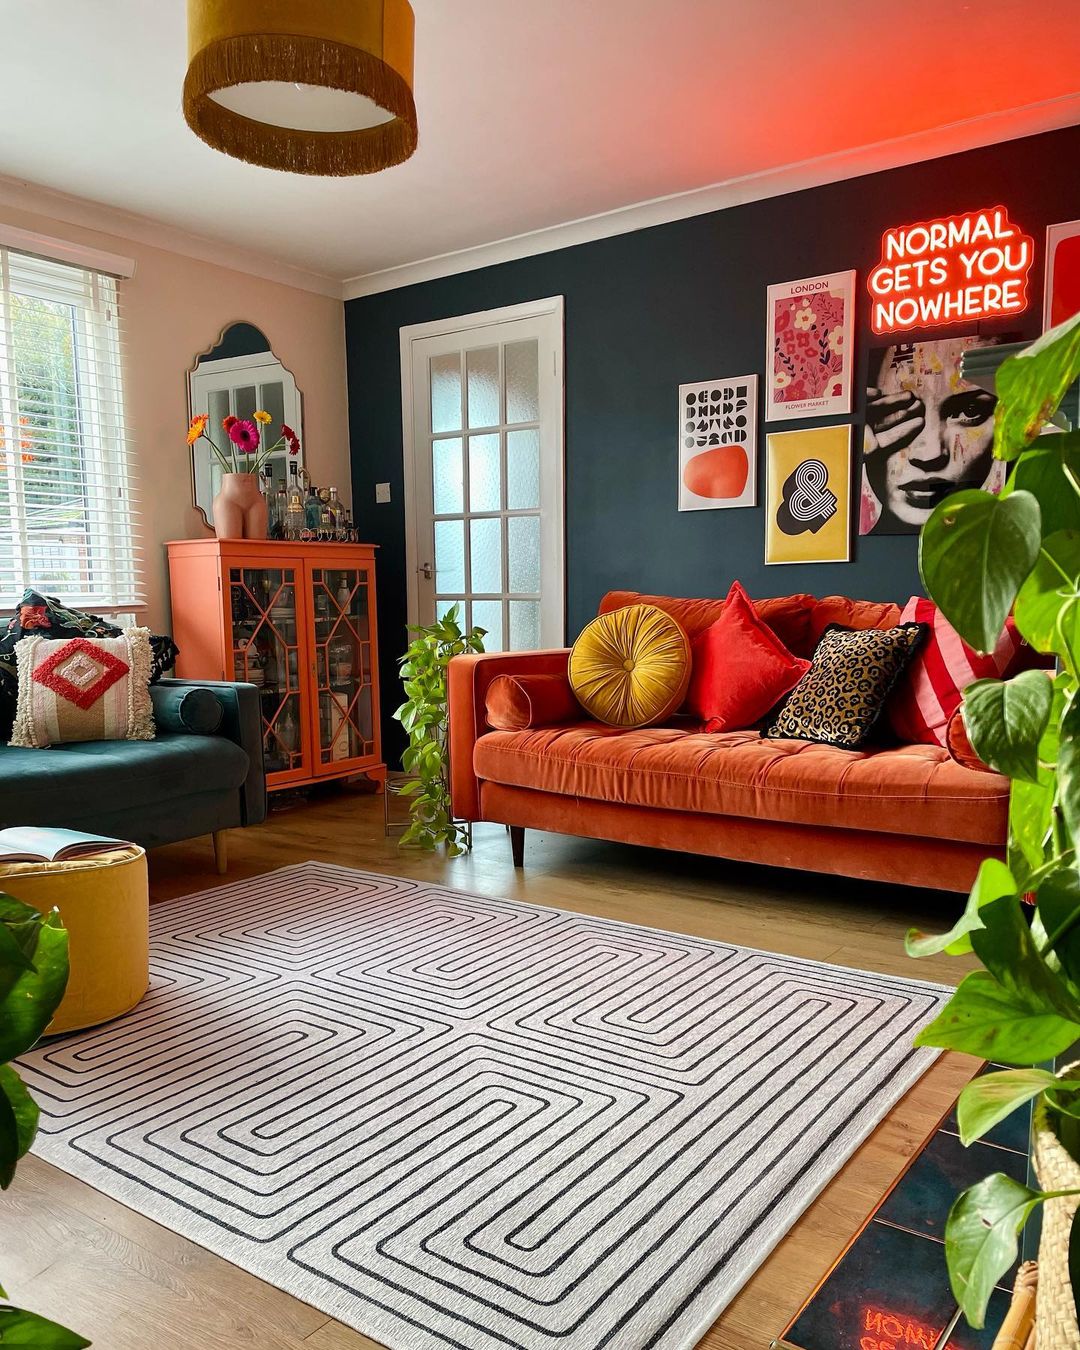 living room decorated with vibrant an orange couch and a green couch, dark green accent wall, colorful furniture, and geometric pattern floor rug